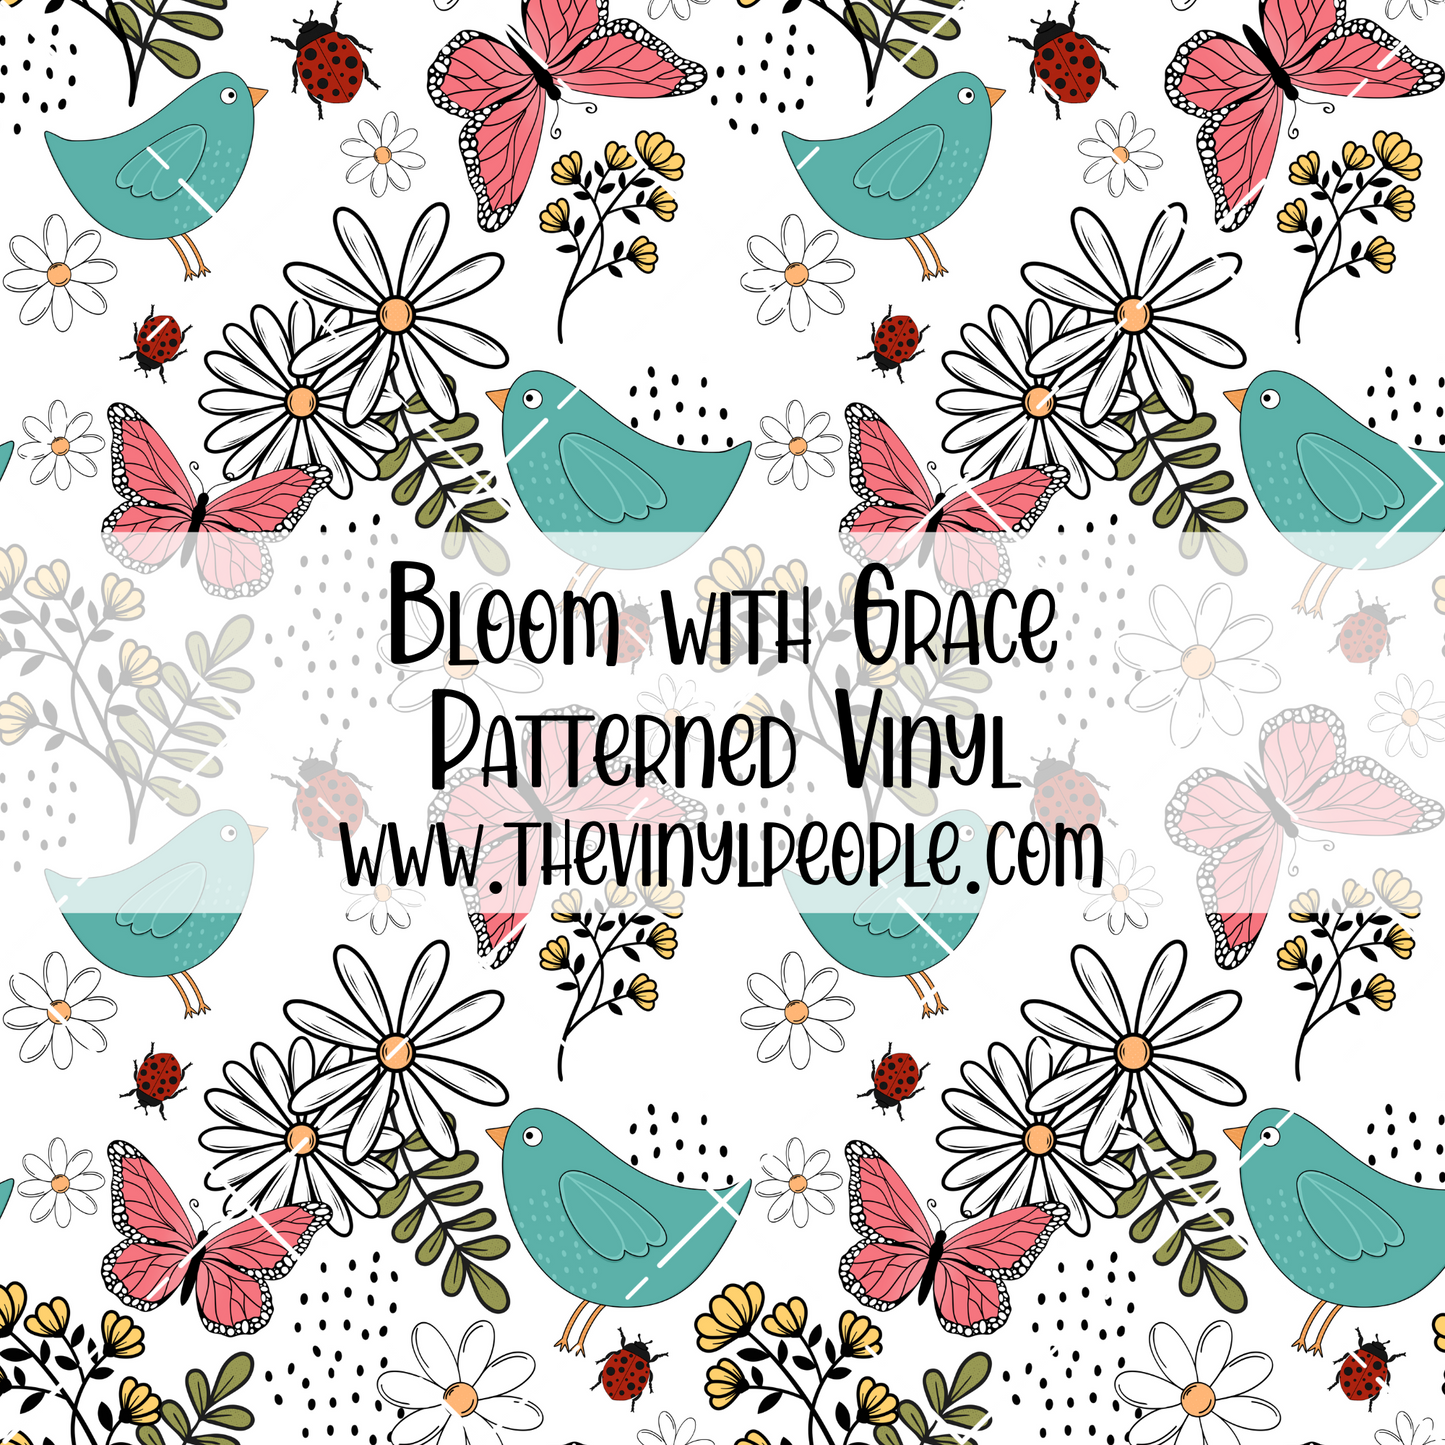 Bloom with Grace Patterned Vinyl